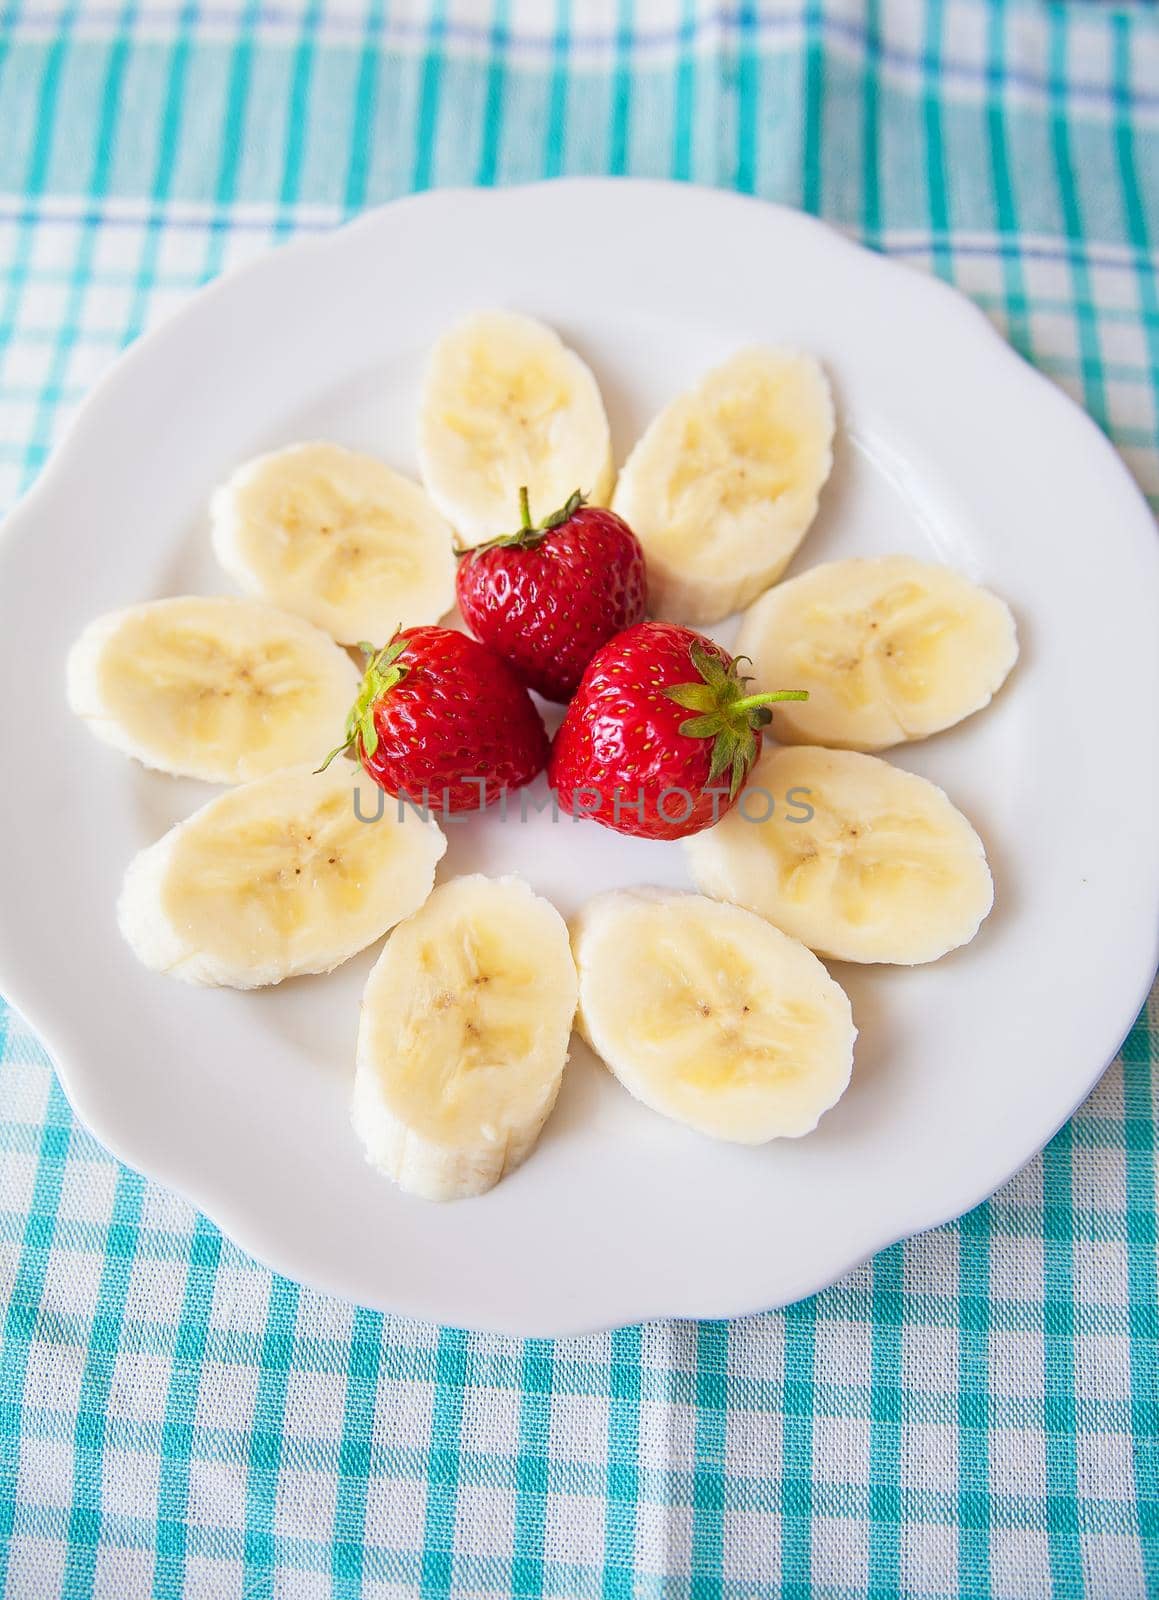 banana and strawberries on white plate and a colorful napkin by sfinks